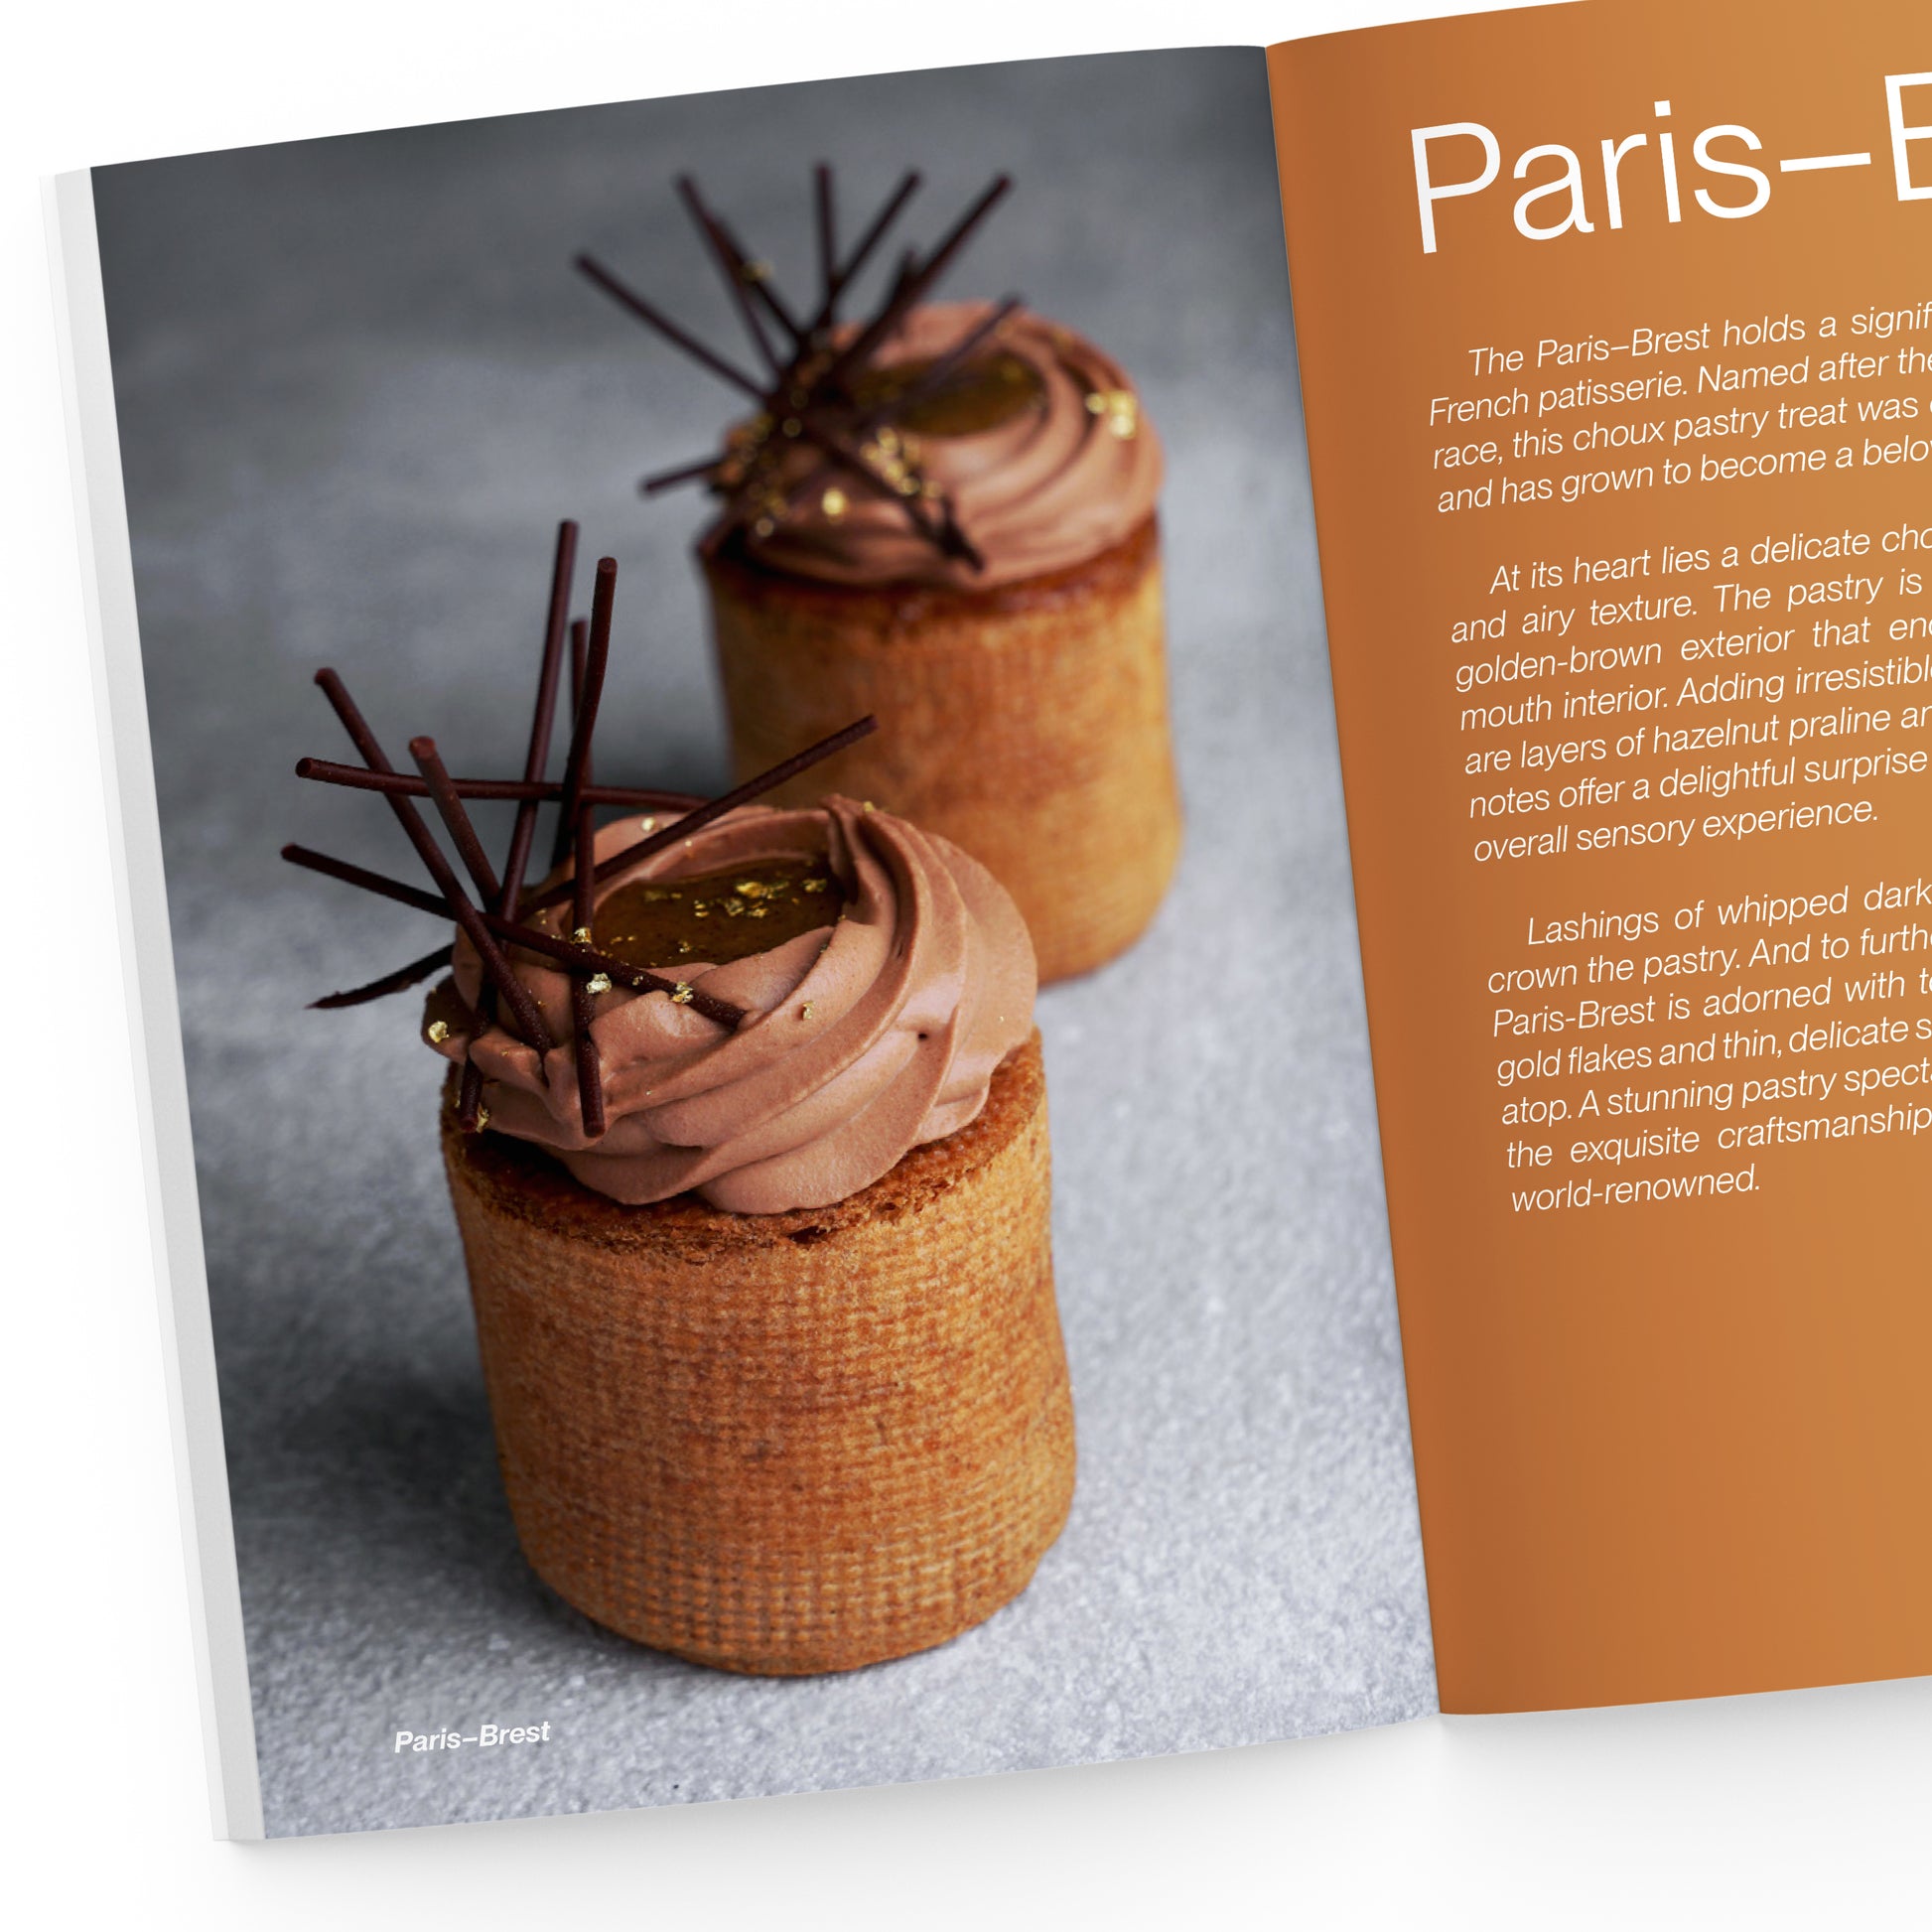 Pastry Collection by Antonio Bachour